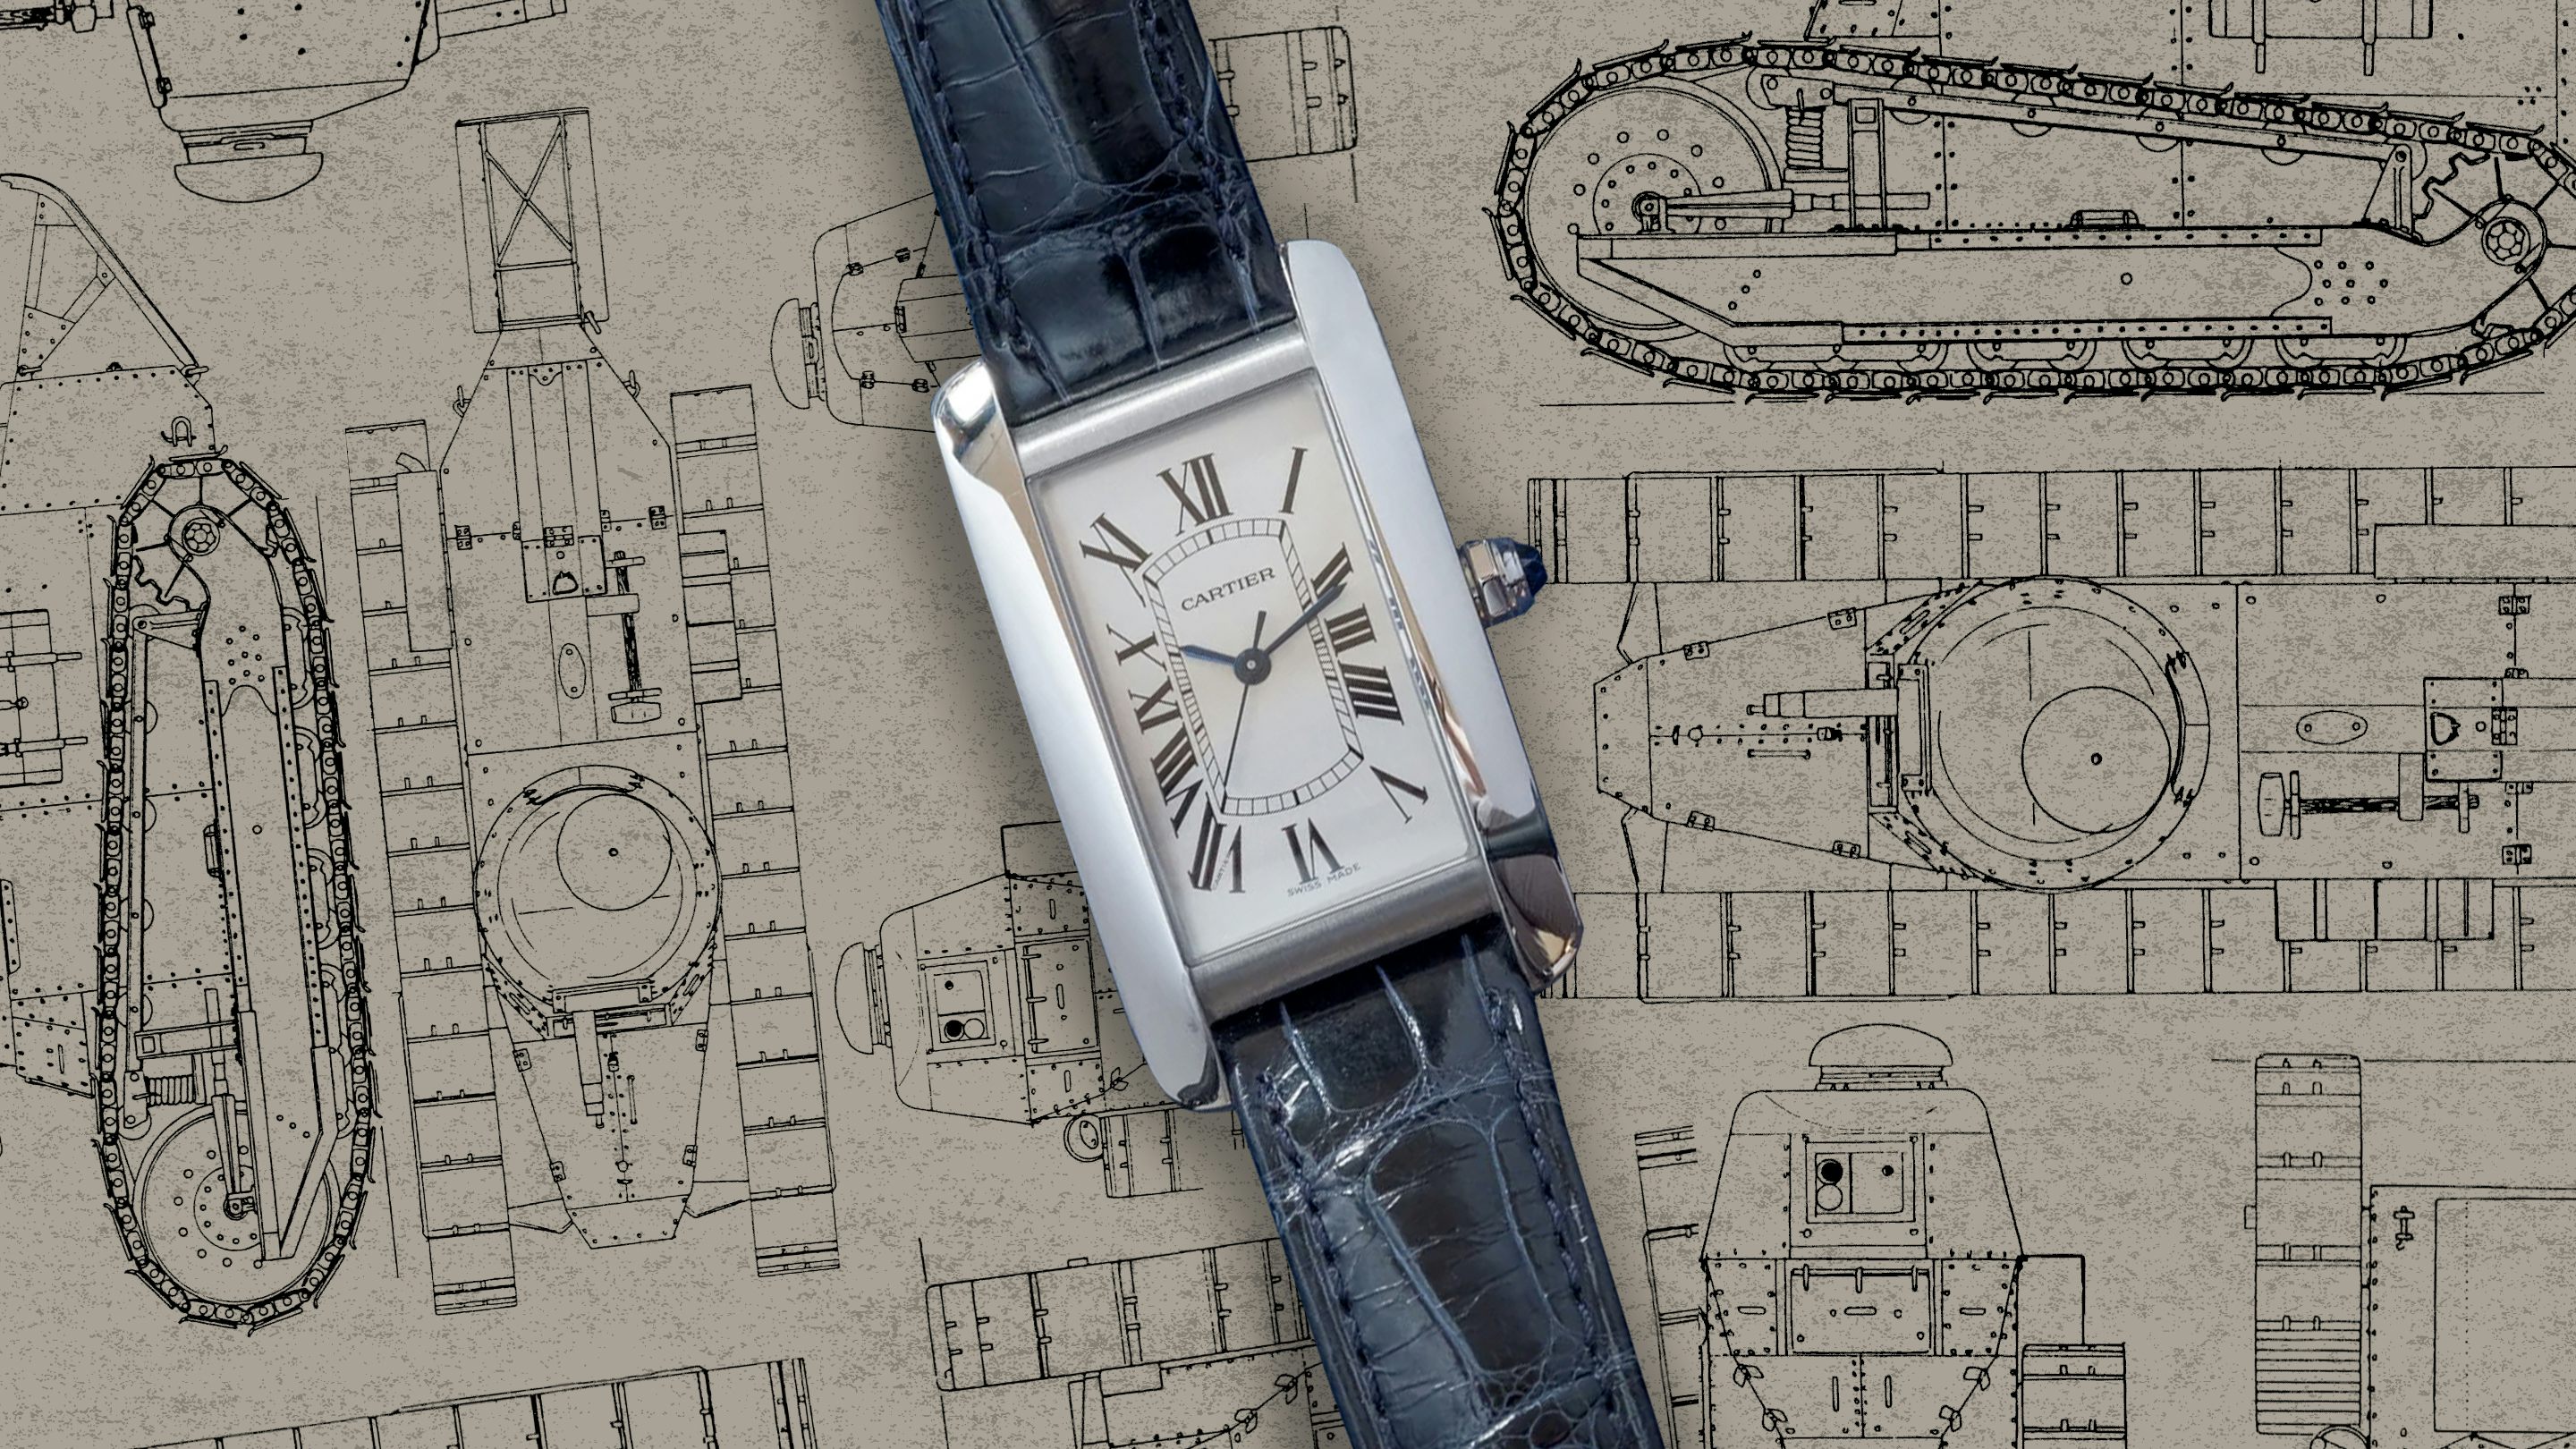 The Cartier Tank: An Iconic Watch With A Rich History